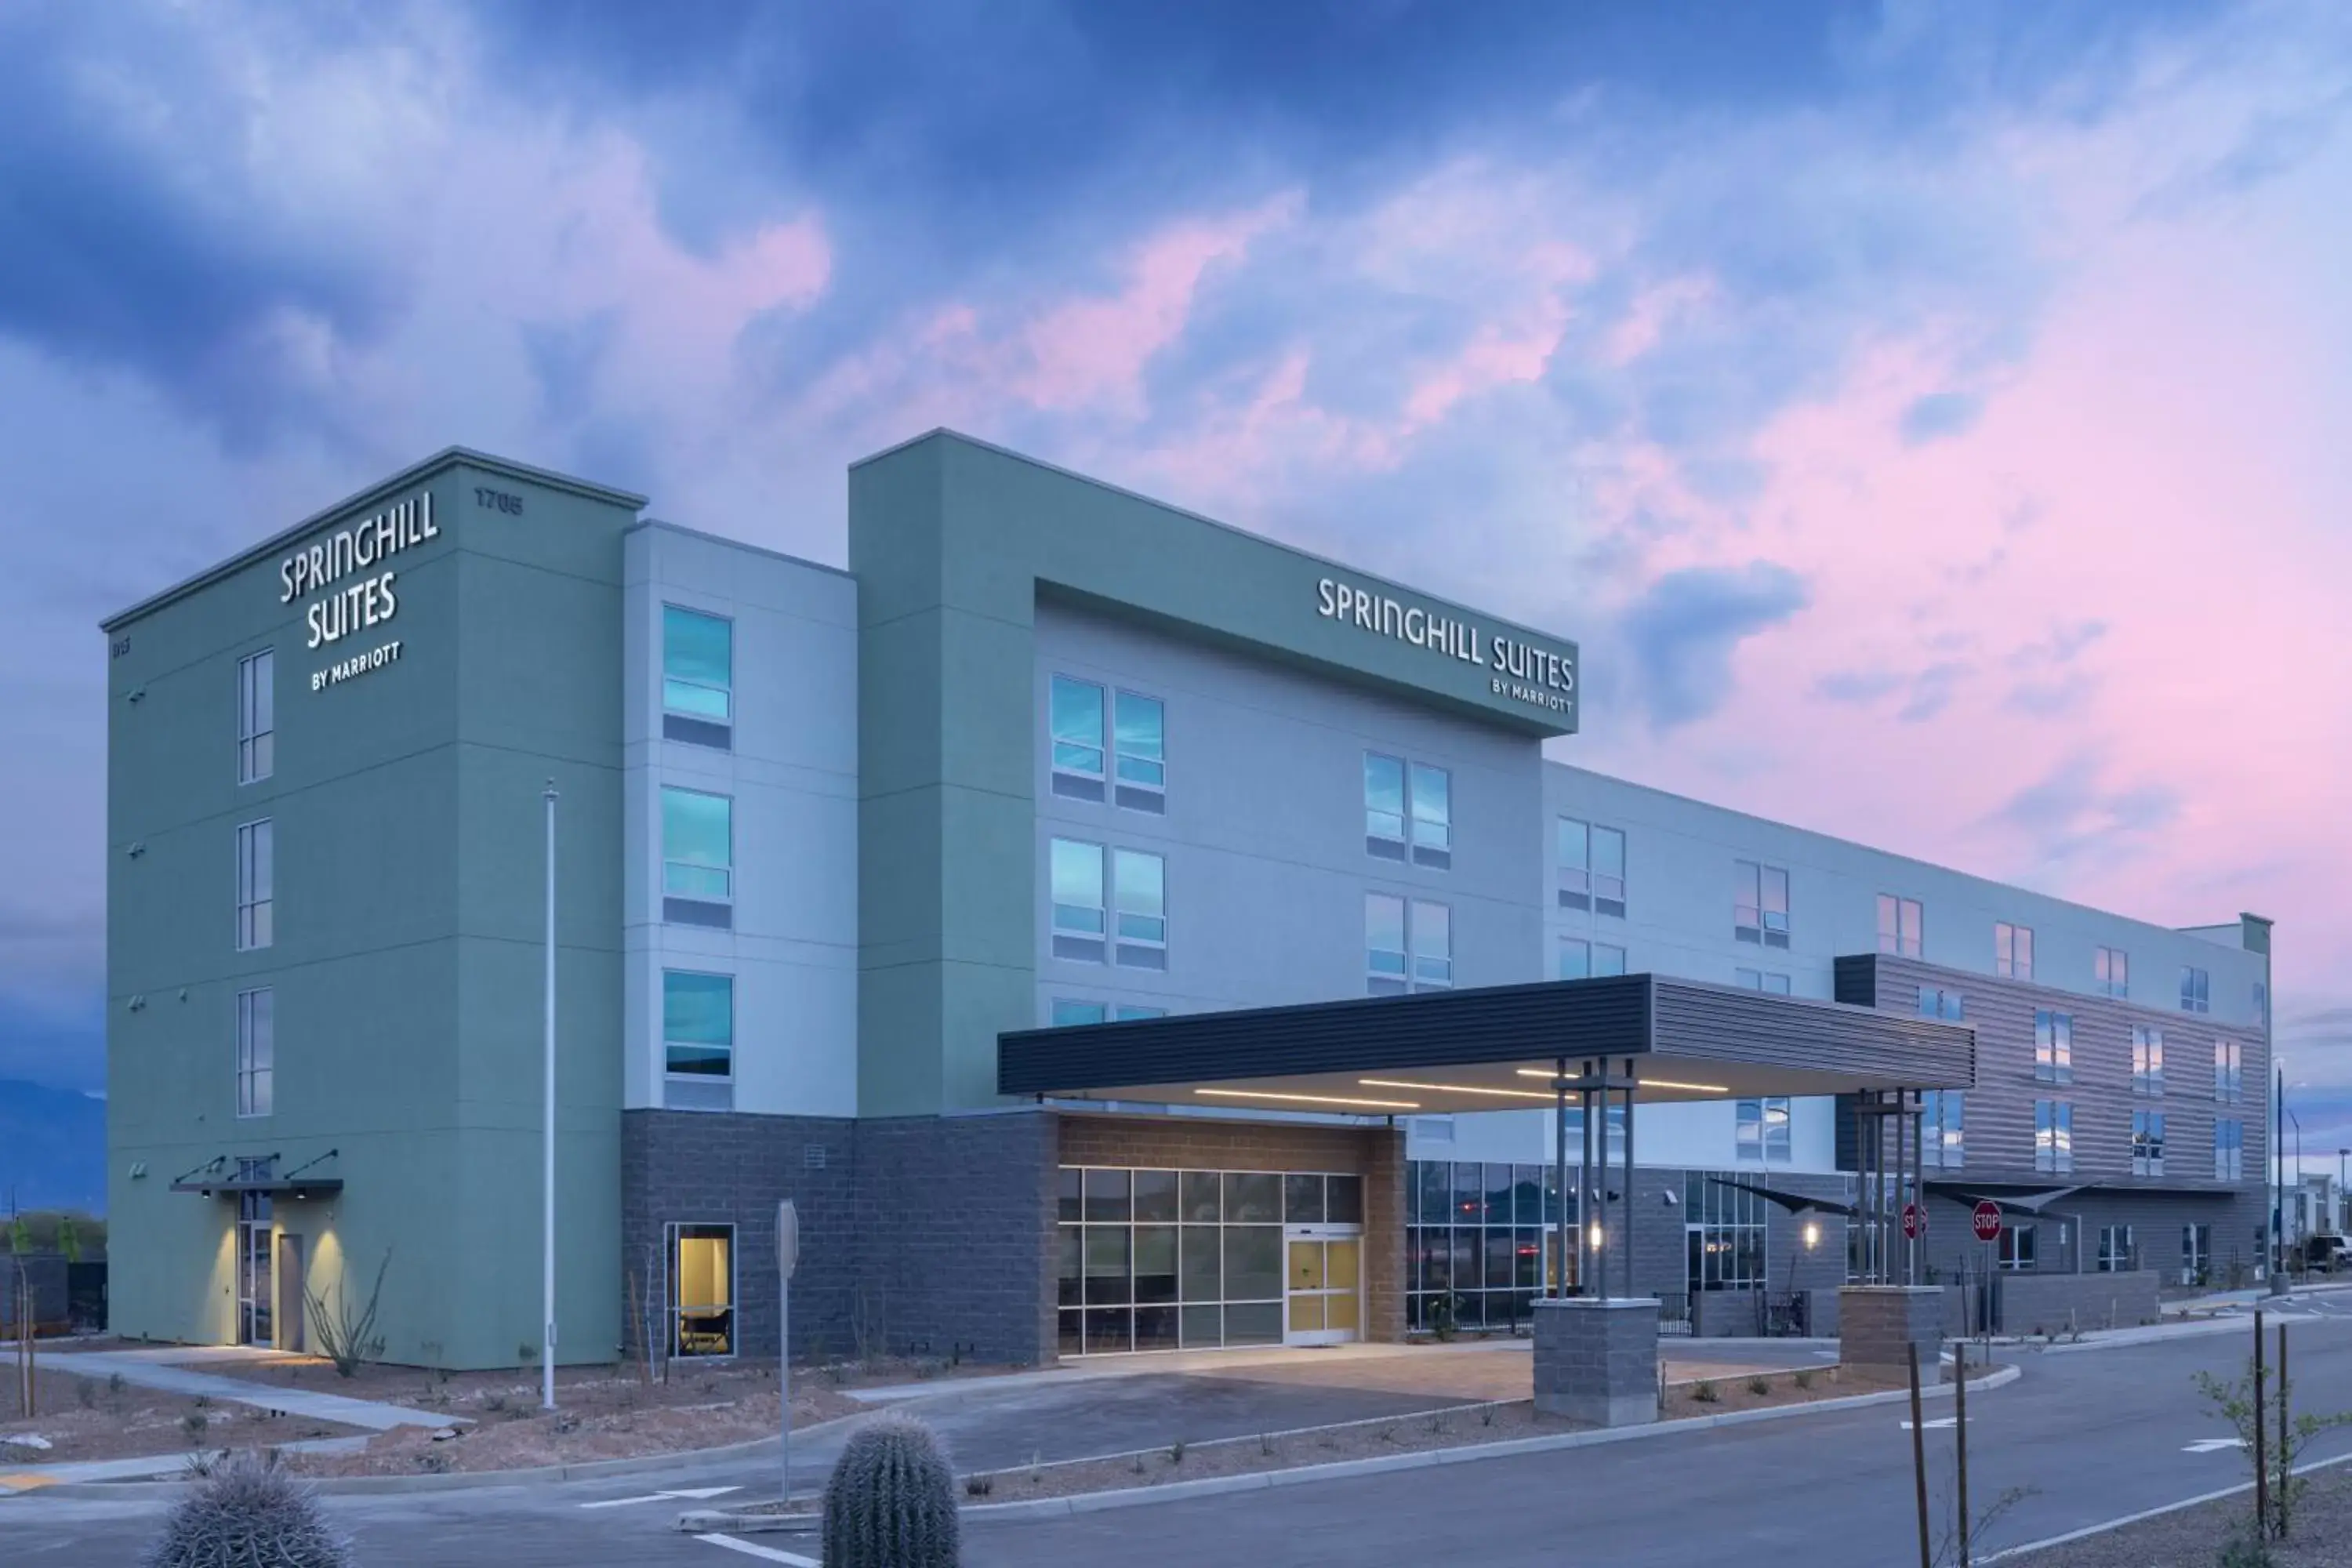 Property Building in SpringHill Suites by Marriott Tucson at The Bridges